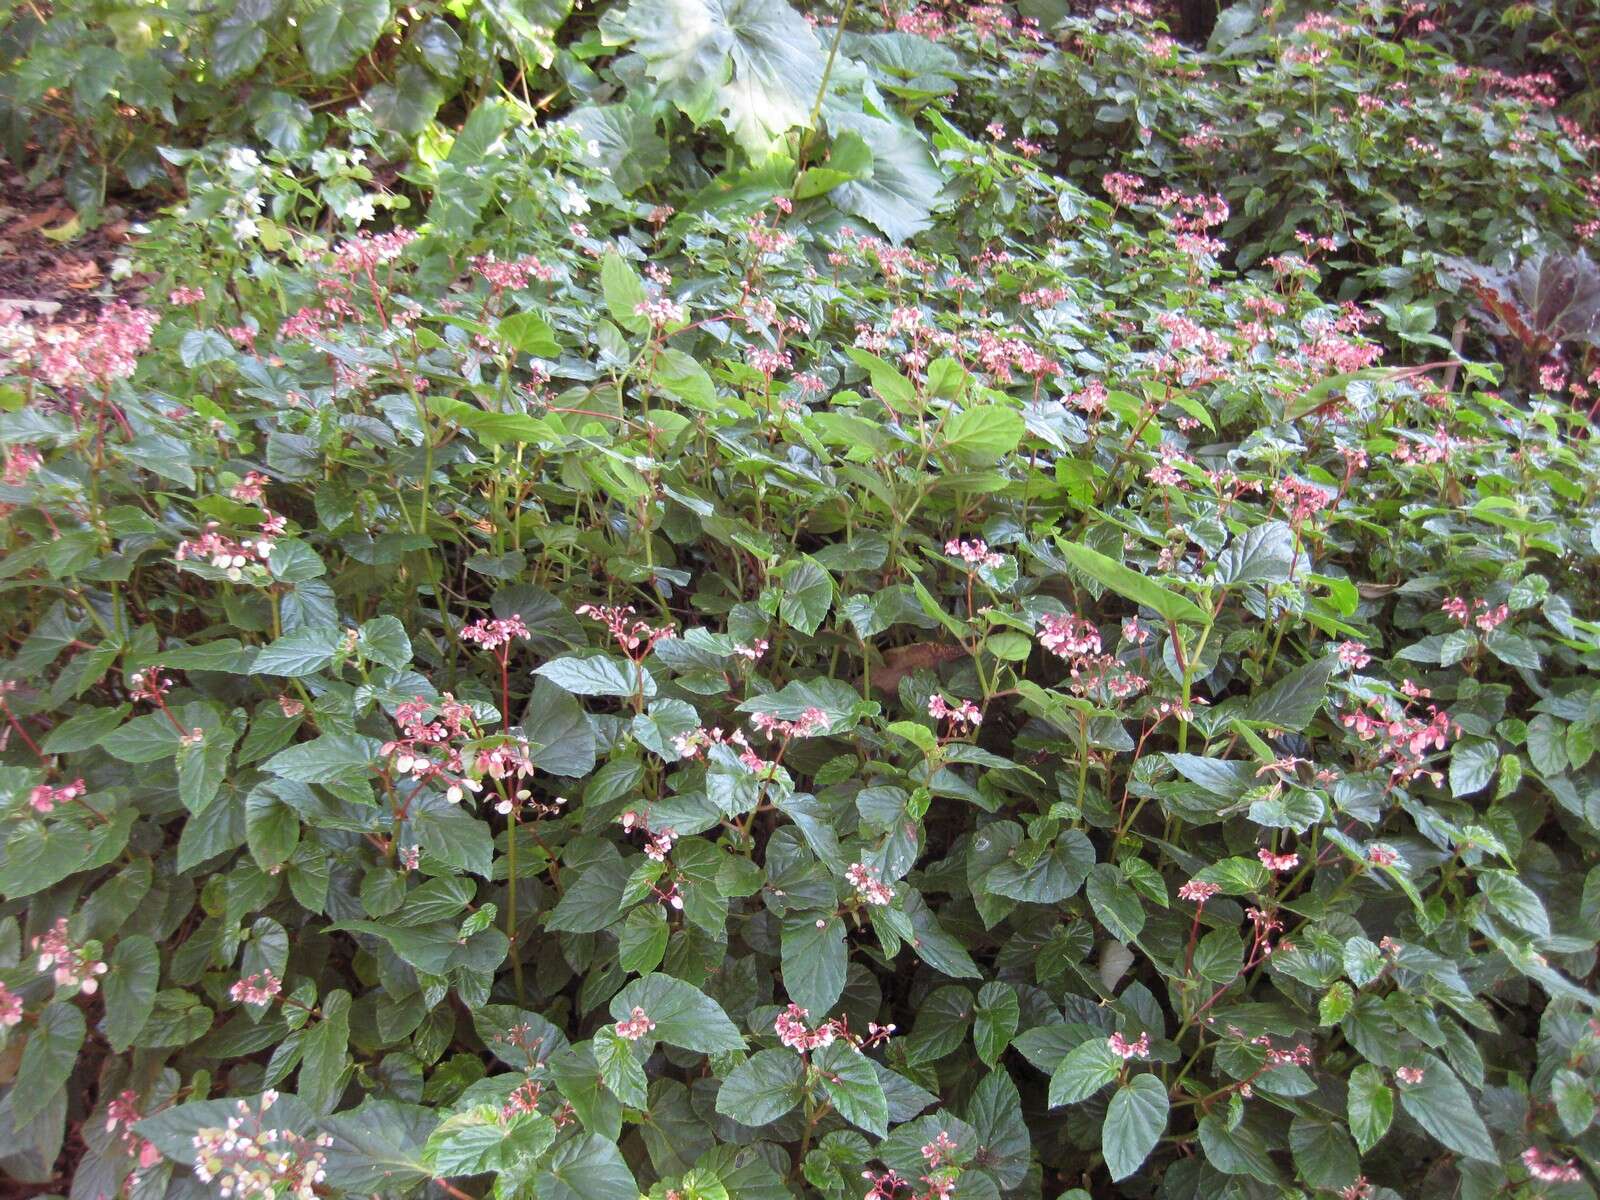 Image of Begonia domingensis A. DC.